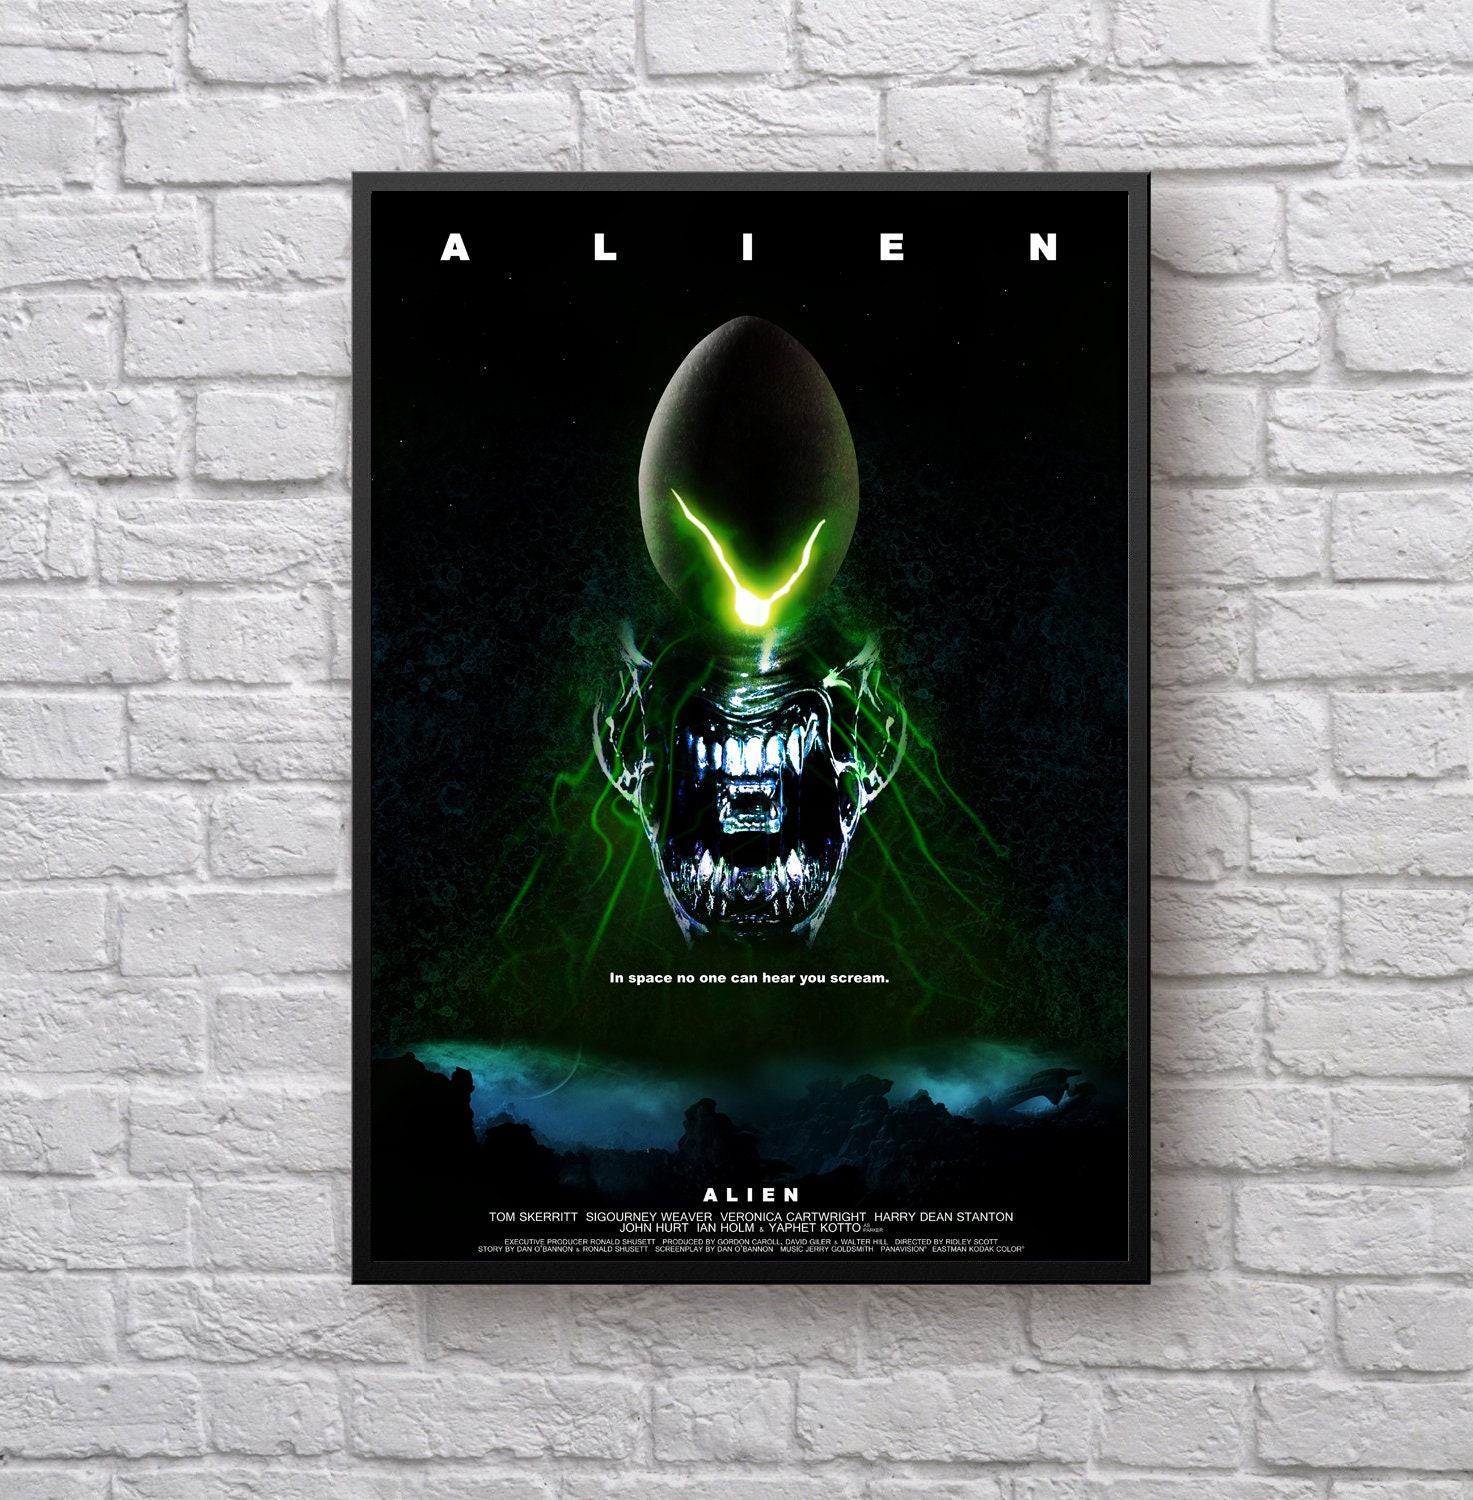 Alien in Space No One Can Hear You Scream Cover Poster Artwork | Etsy